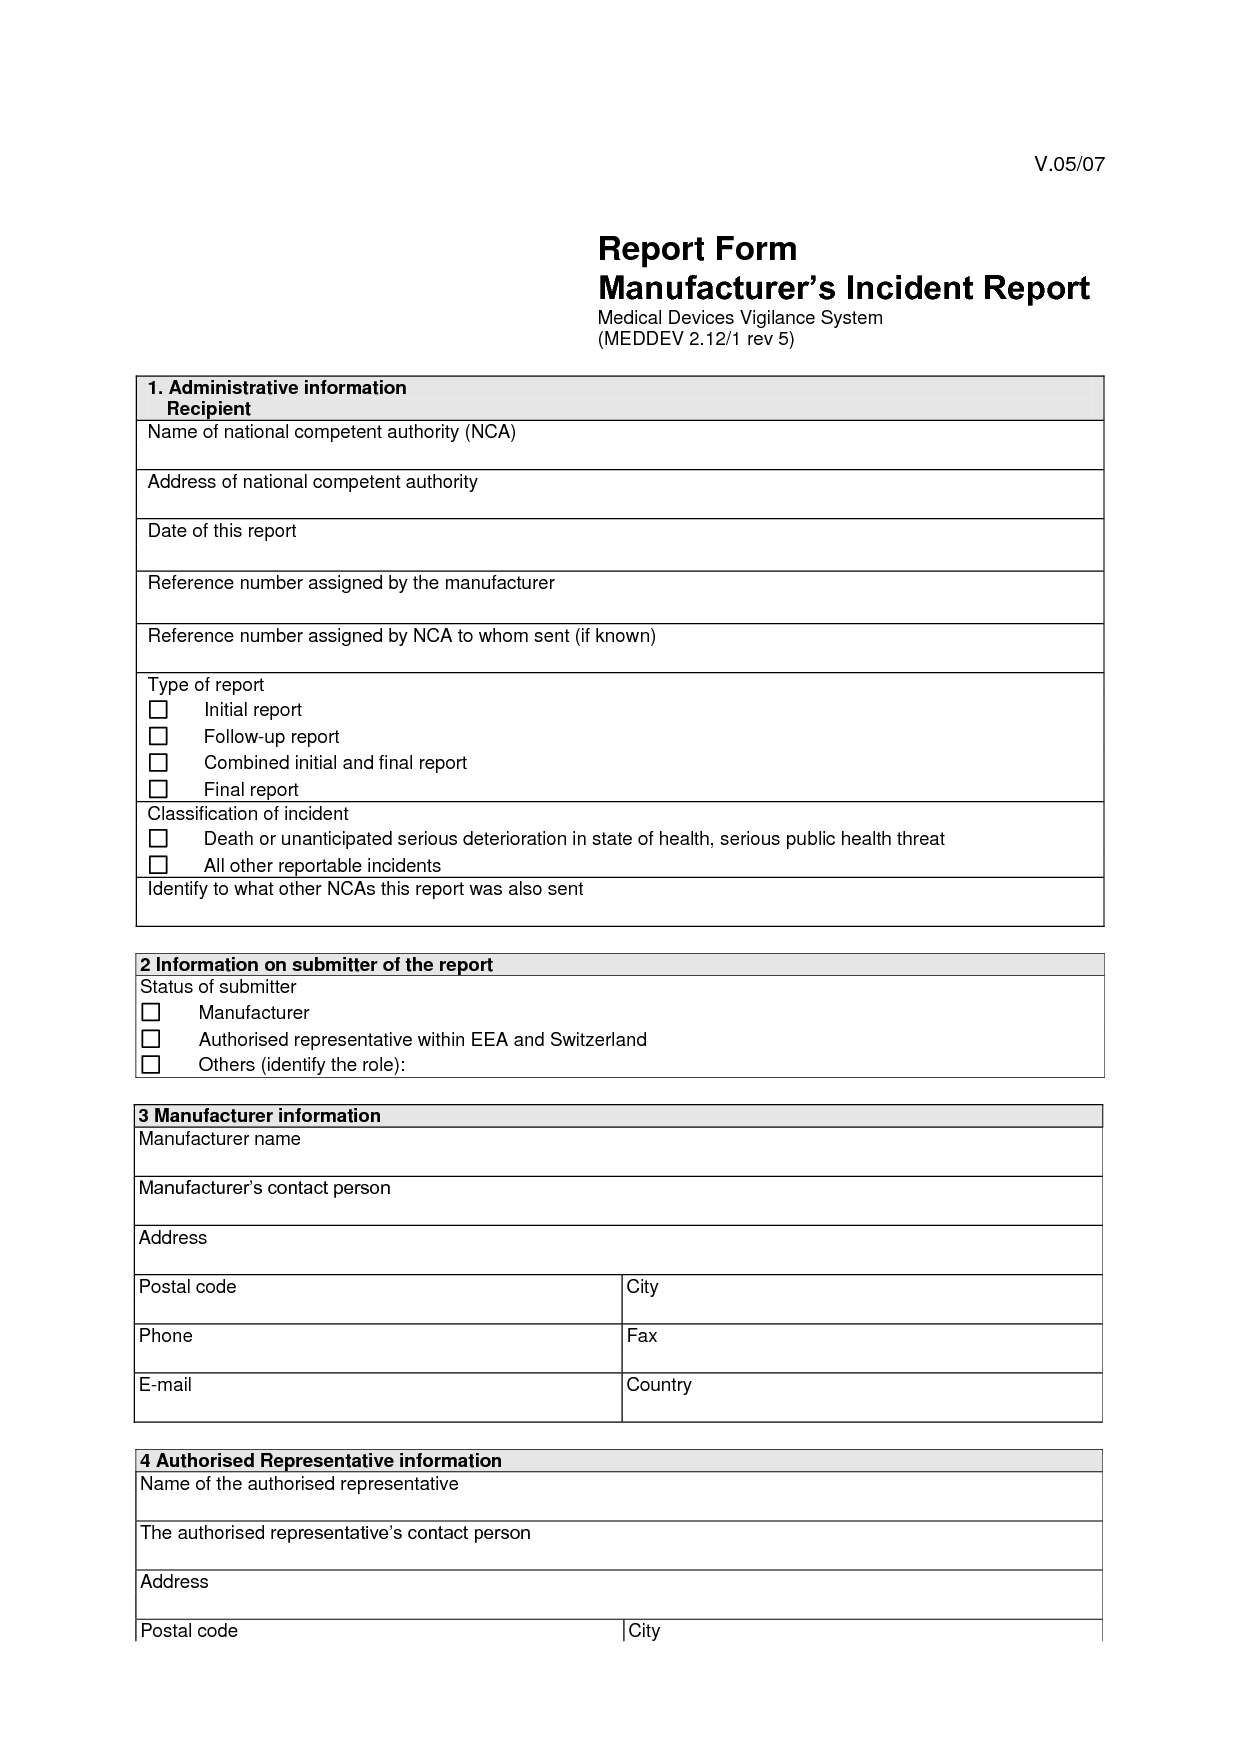 Incident Report Form Template Doc  Sansurabionetassociats with regard to Incident Report Form Template Doc